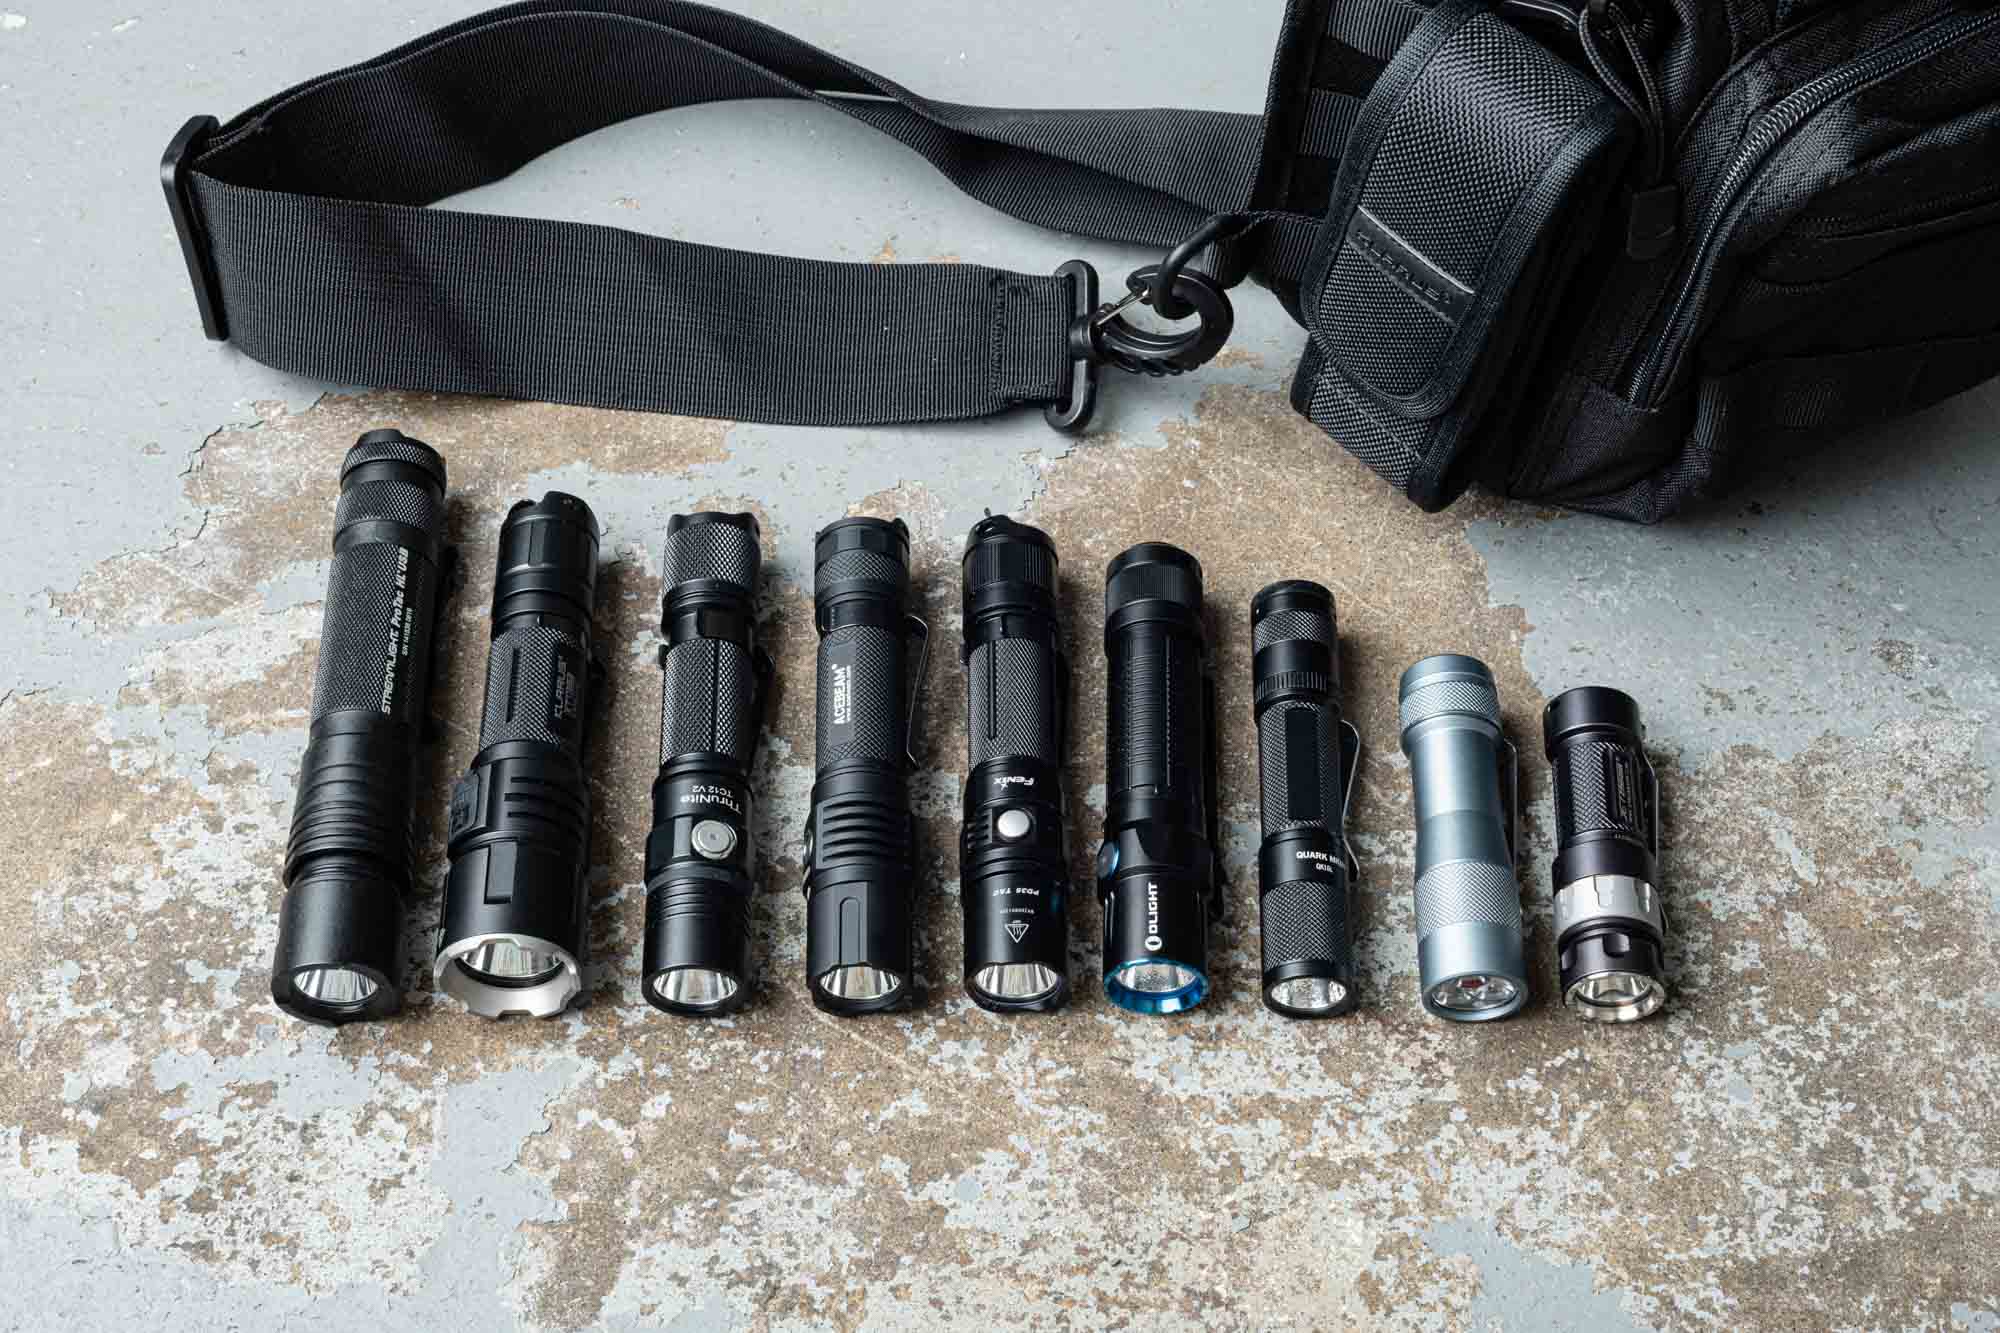 The Tactical Flashlights of Reviews by Your Best Digs